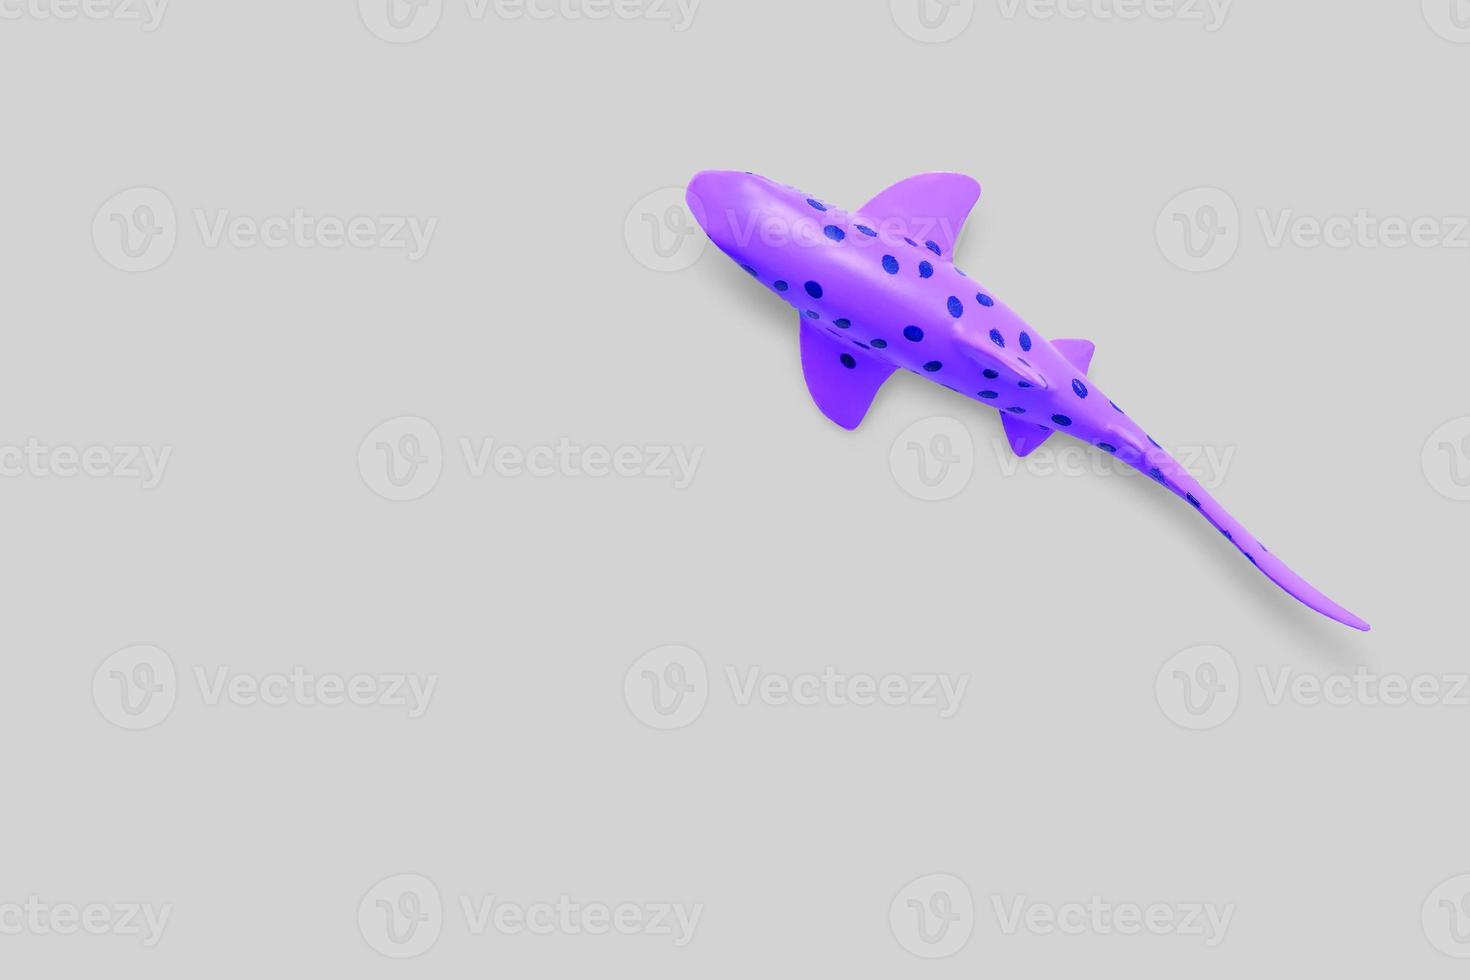 Close up view purple toy fish isolated on white background. added copy space for text. photo